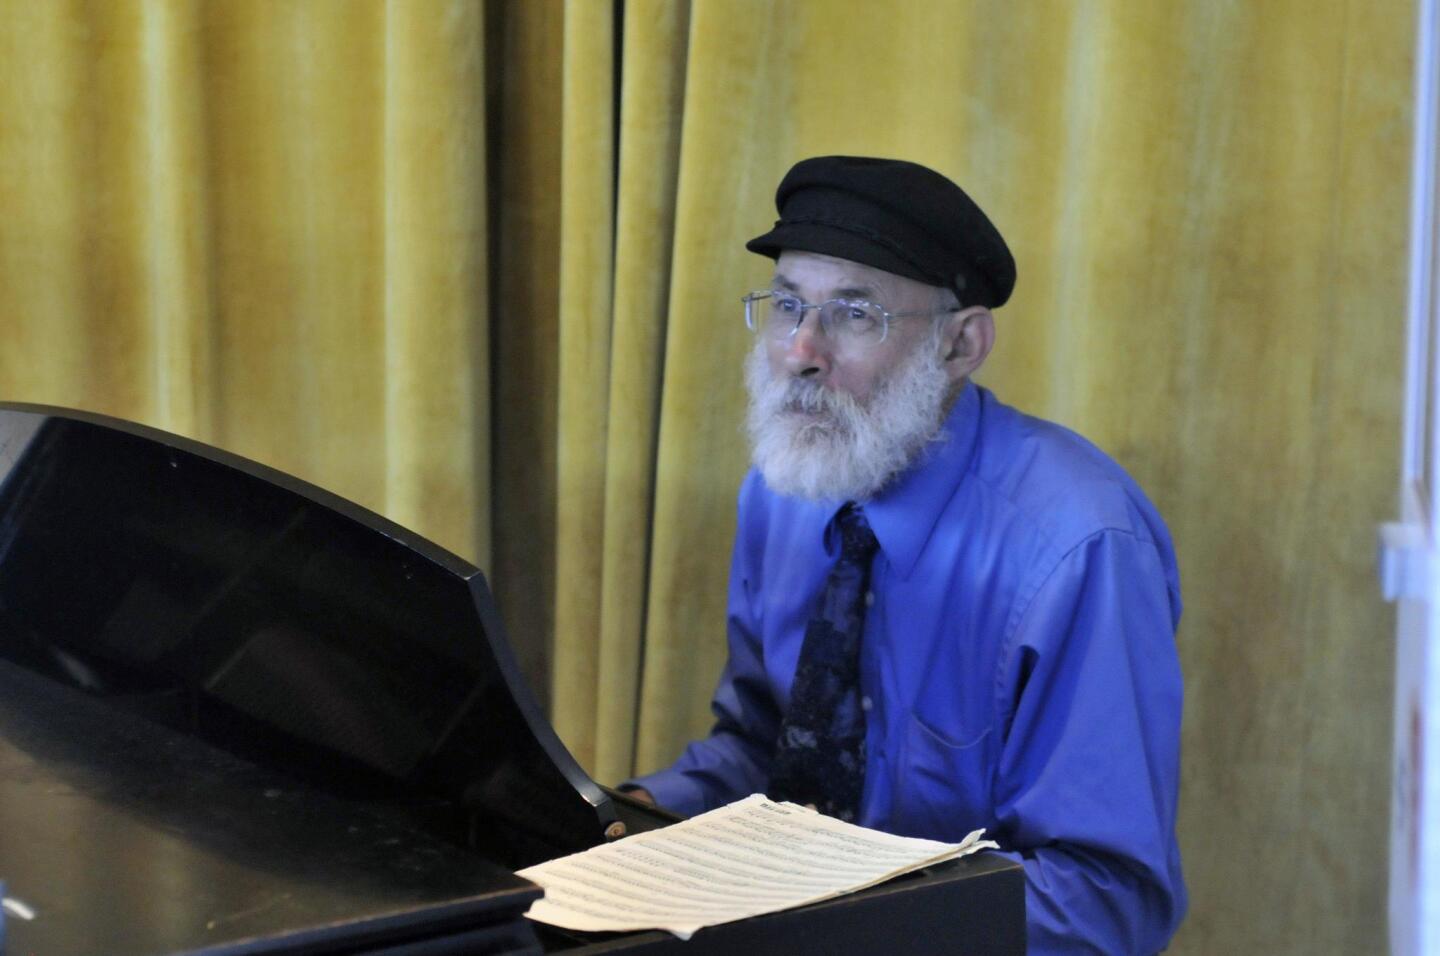 Steve Zuill at the piano